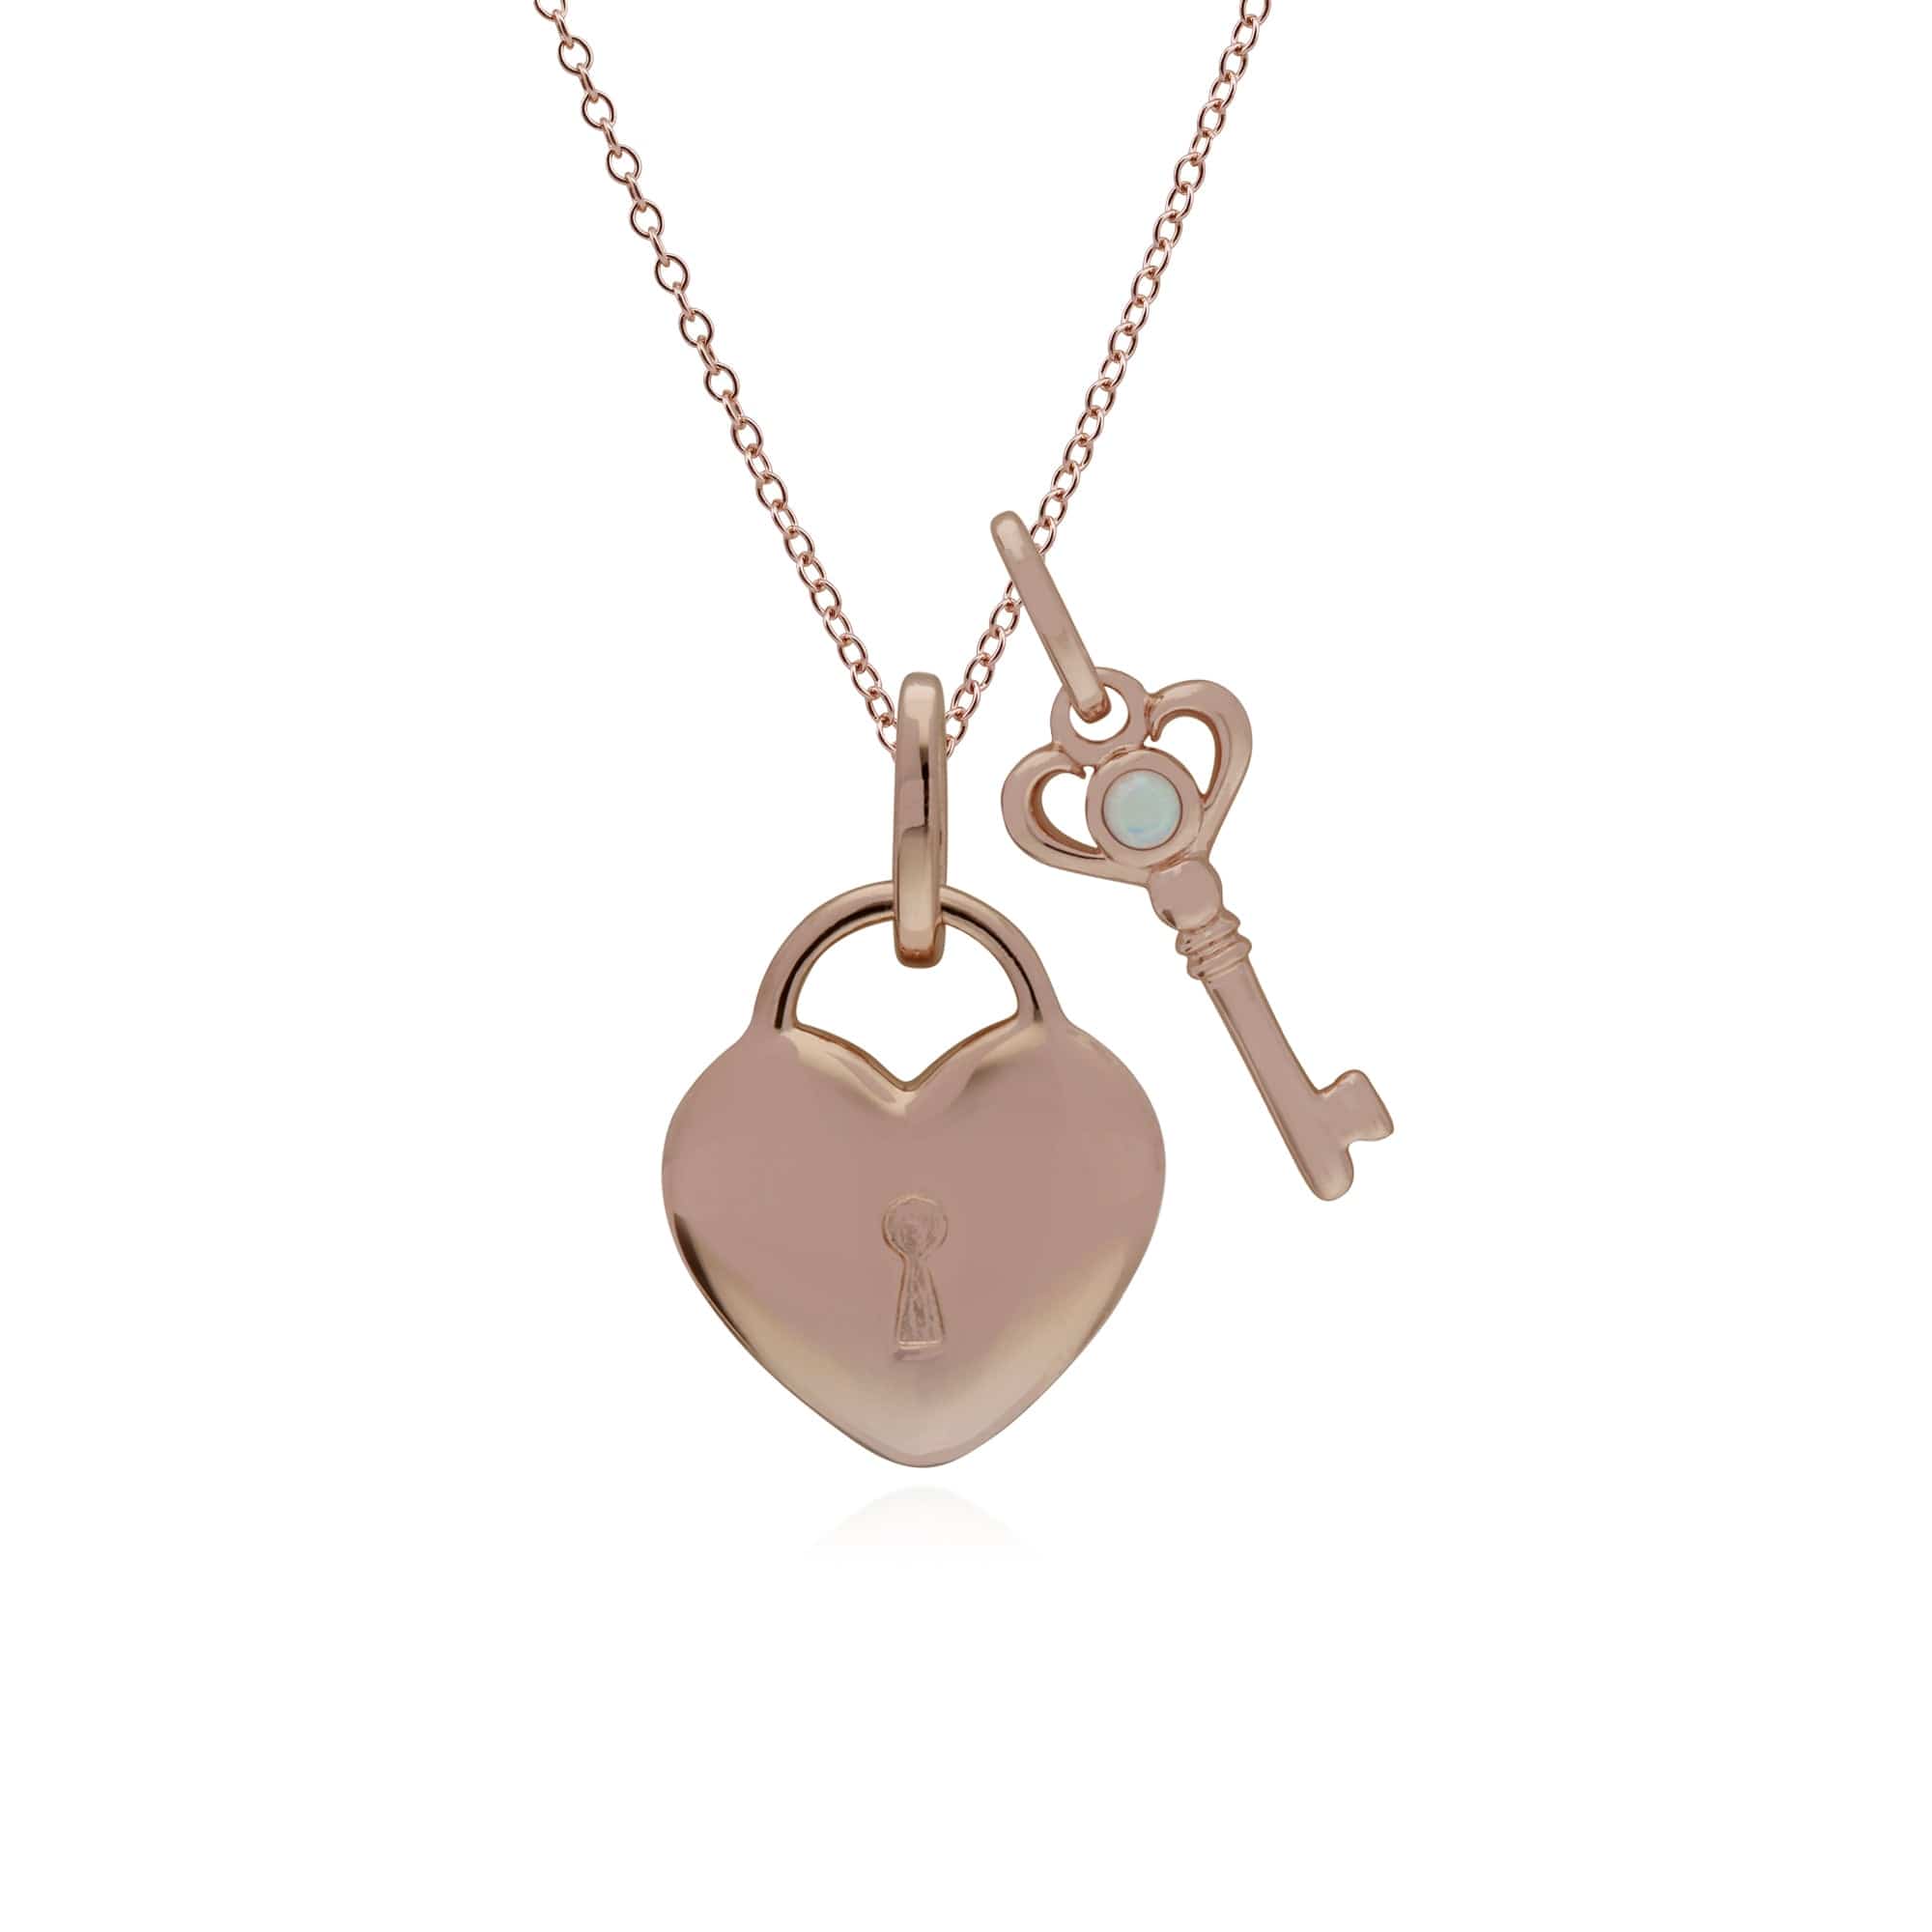 270P028602925-270P026901925 Classic Heart Lock Pendant & Opal Key Charm in Rose Gold Plated 925 Sterling Silver 1